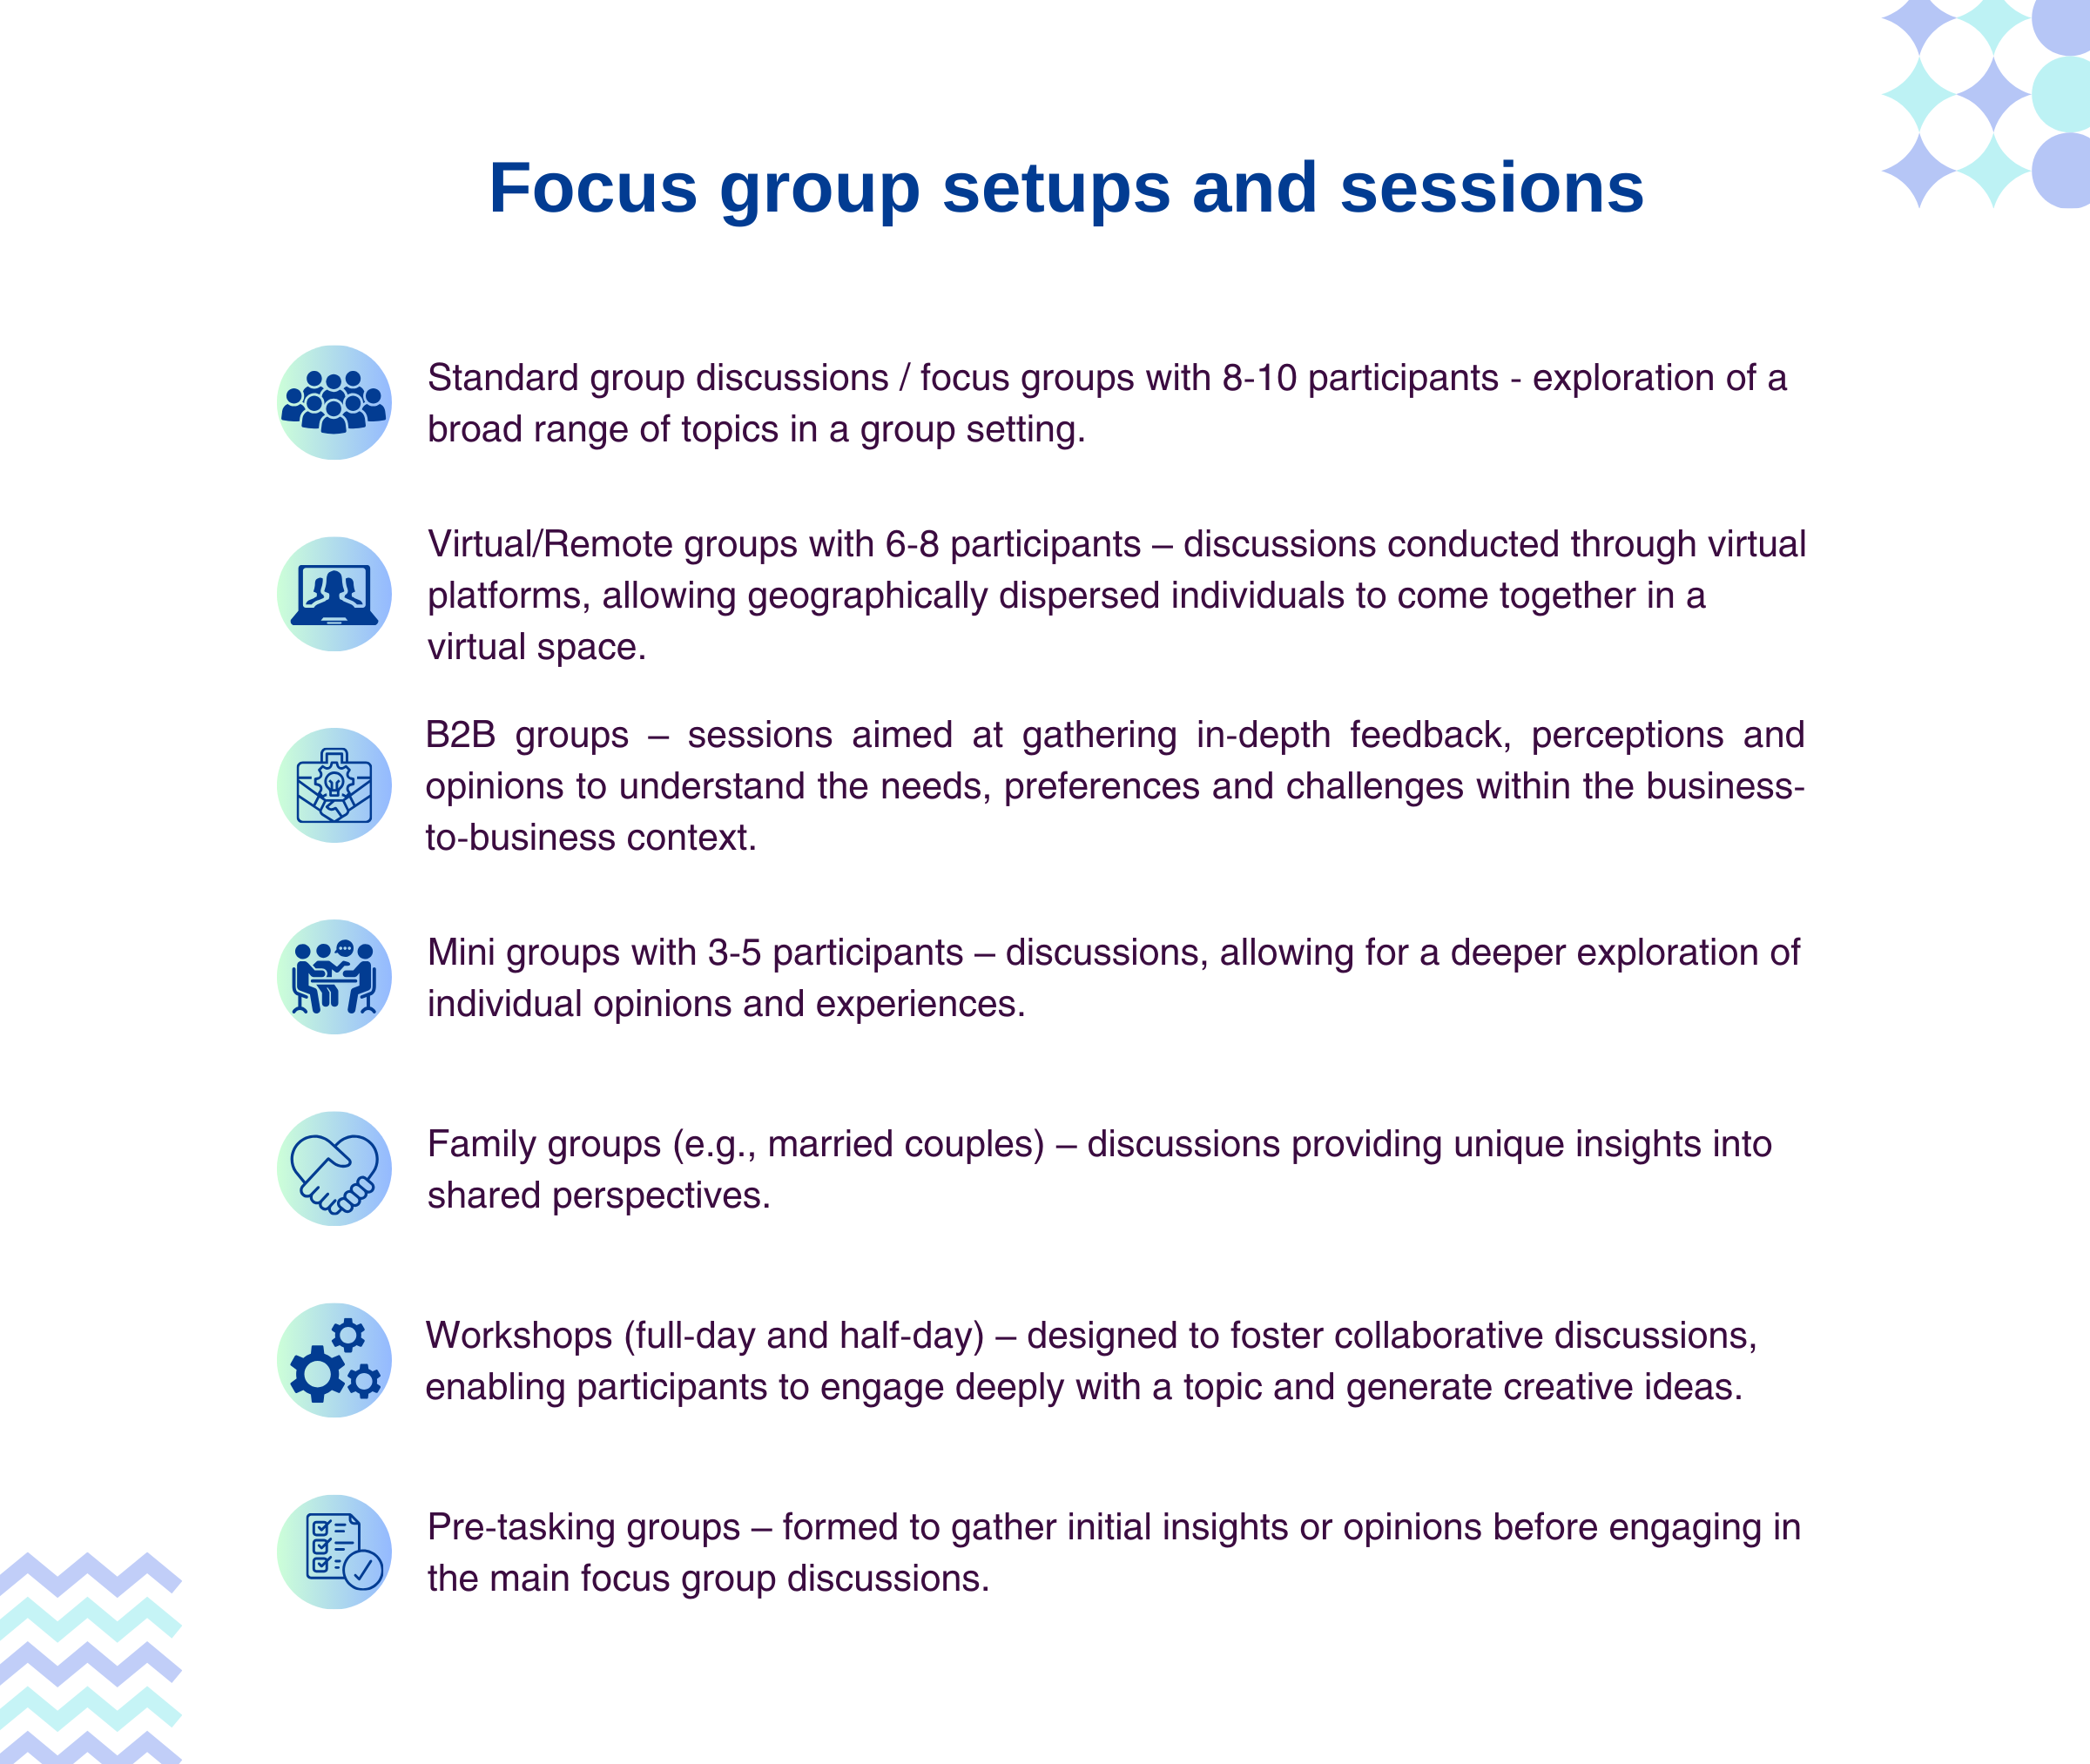 Standard group discussions / focus groups with 8-10 participants    – exploration of a broad range of topics in a group setting.
Virtual/Remote group with 6-8 participants – discussions conducted through virtual platforms, allowing geographically dispersed individuals to come together in a virtual space.
B2B groups – sessions aimed at gathering in-depth feedback, perceptions and opinions to understand the needs, preferences and challenges within the business-to-business context.
Mini groups with 3-5 participants – discussions, allowing for a deeper exploration of individual opinions and experiences.
Family groups (e.g., married couples) – discussions providing unique insights into shared perspectives.
Workshops (full-day and half-day) – designed to foster collaborative discussions, enabling participants to engage deeply with a topic and generate creative ideas.
Pre-tasking groups – formed to gather initial insights or opinions before engaging in the main focus group discussions.